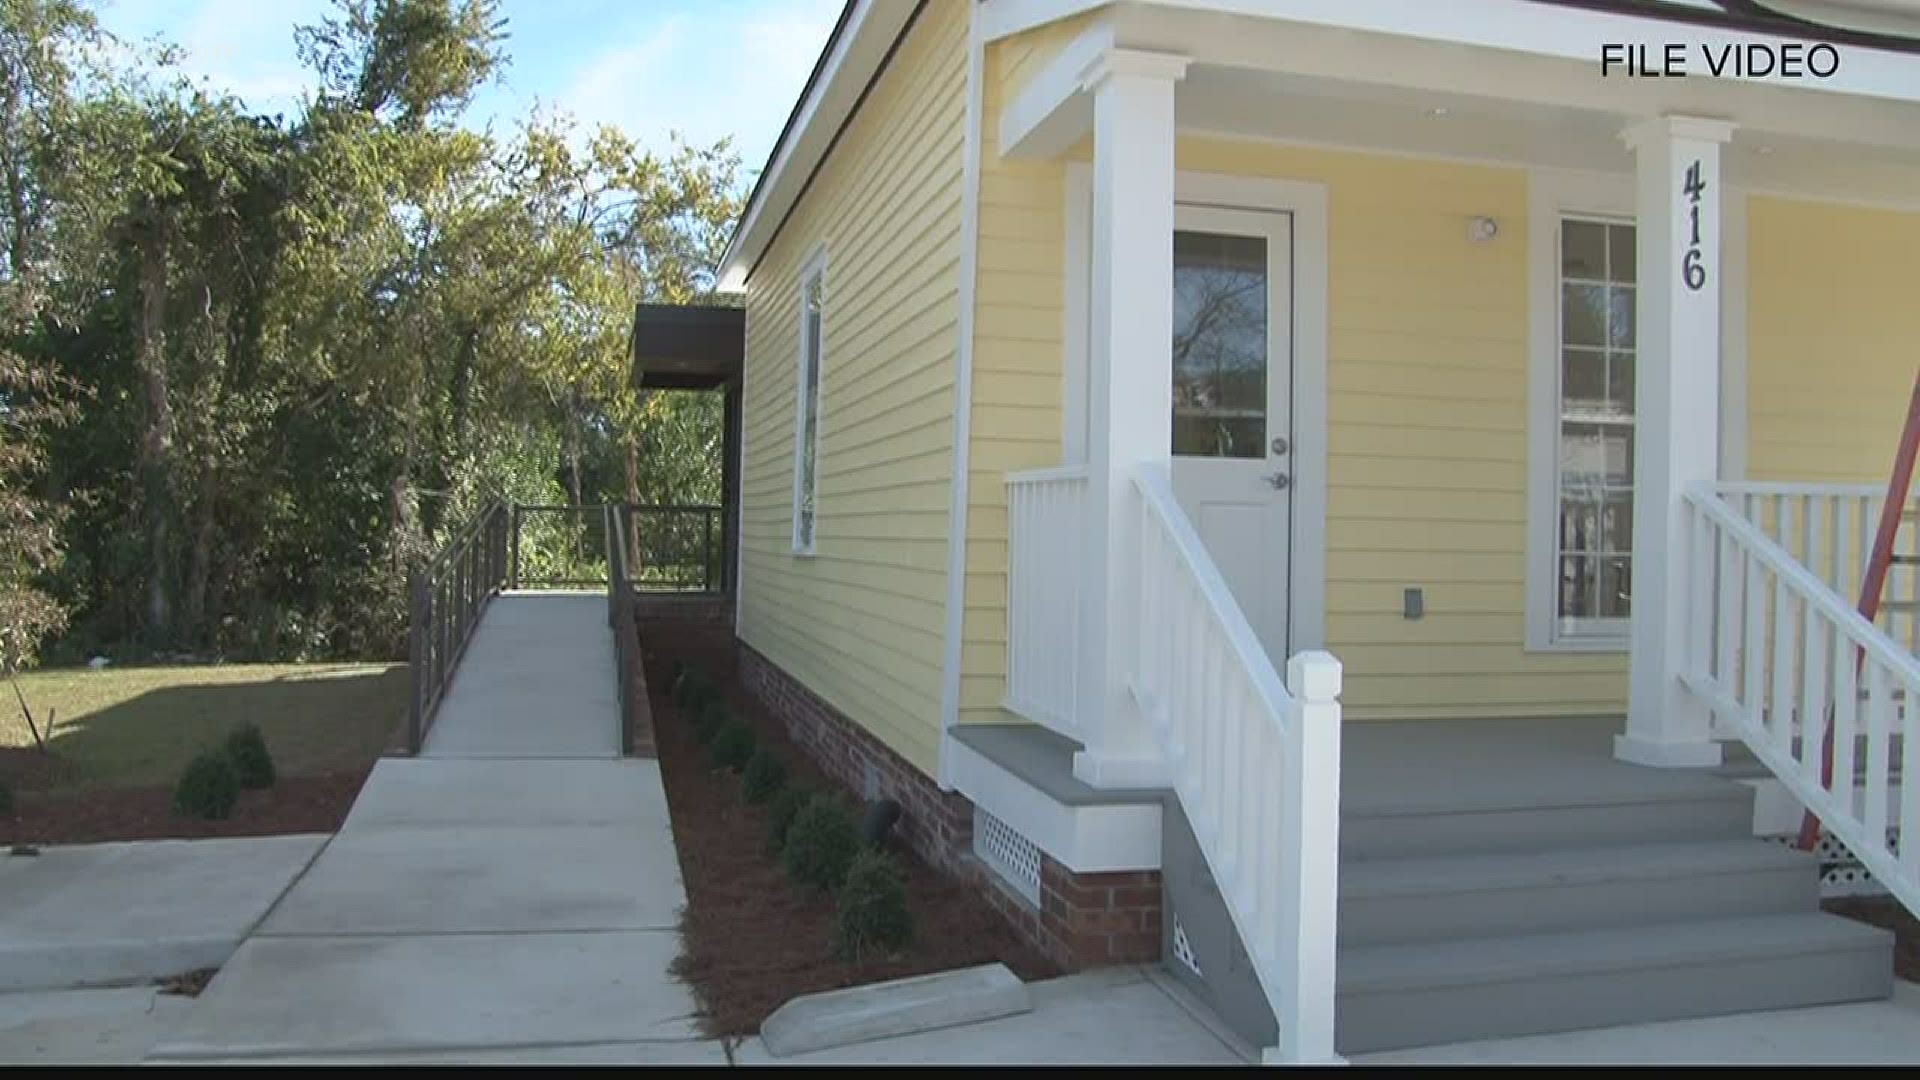 Little Richard was known for putting Macon on the map. Hear from county leaders who fought to keep his childhood home in Pleasant Hill intact.